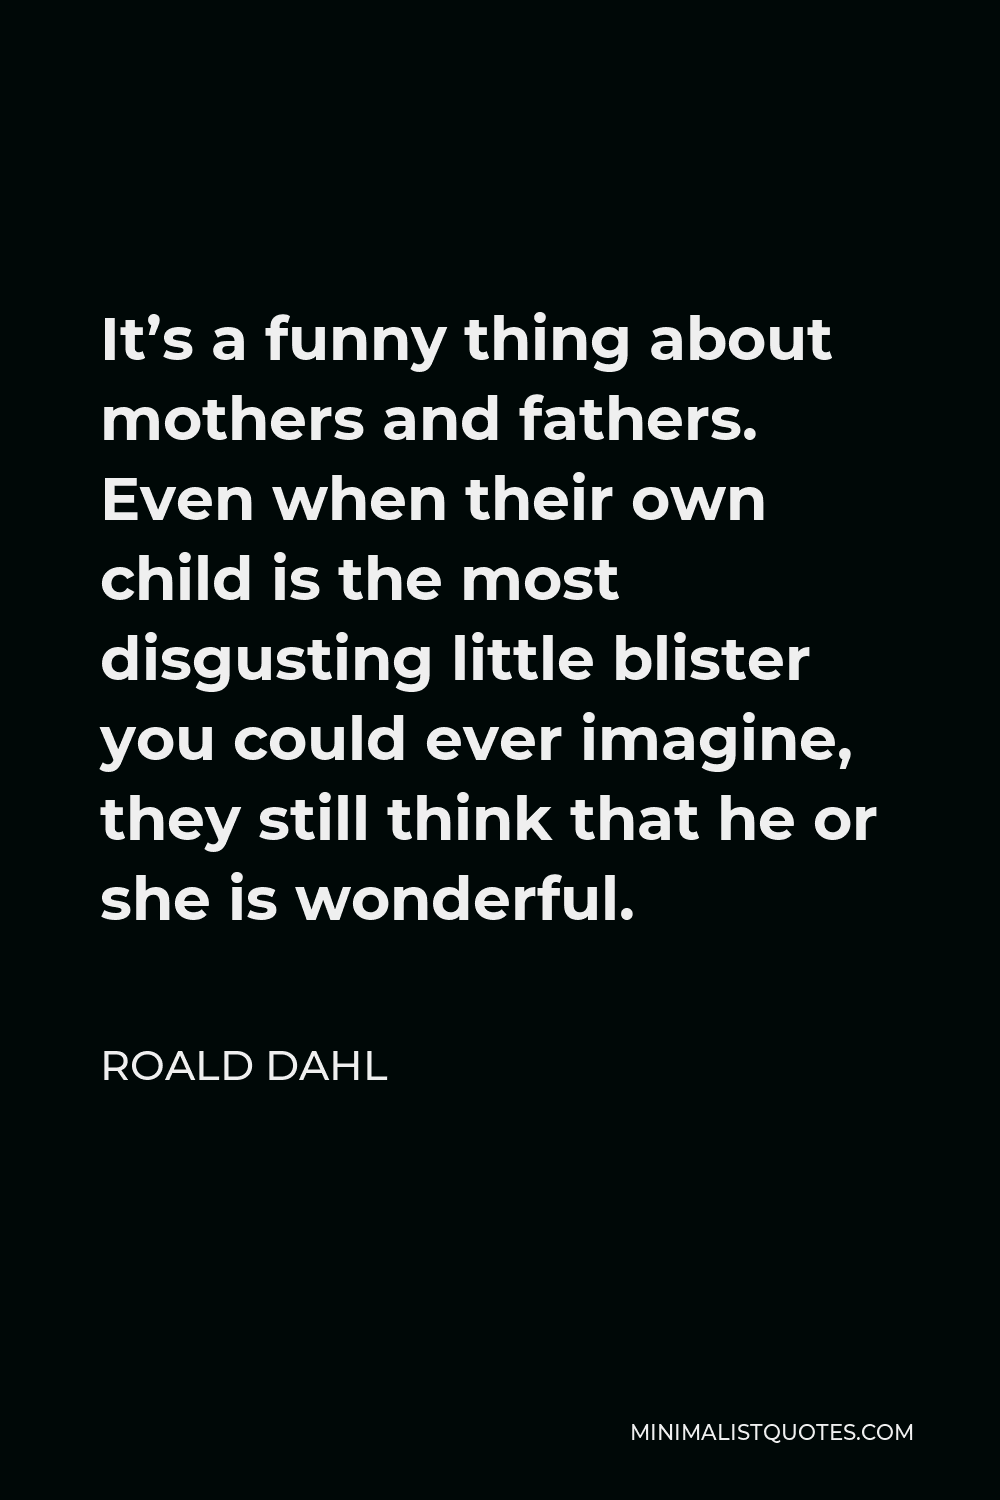 Roald Dahl Quote: It's a funny thing about mothers and fathers. Even when  their own child is the most disgusting little blister you could ever  imagine, they still think that he or